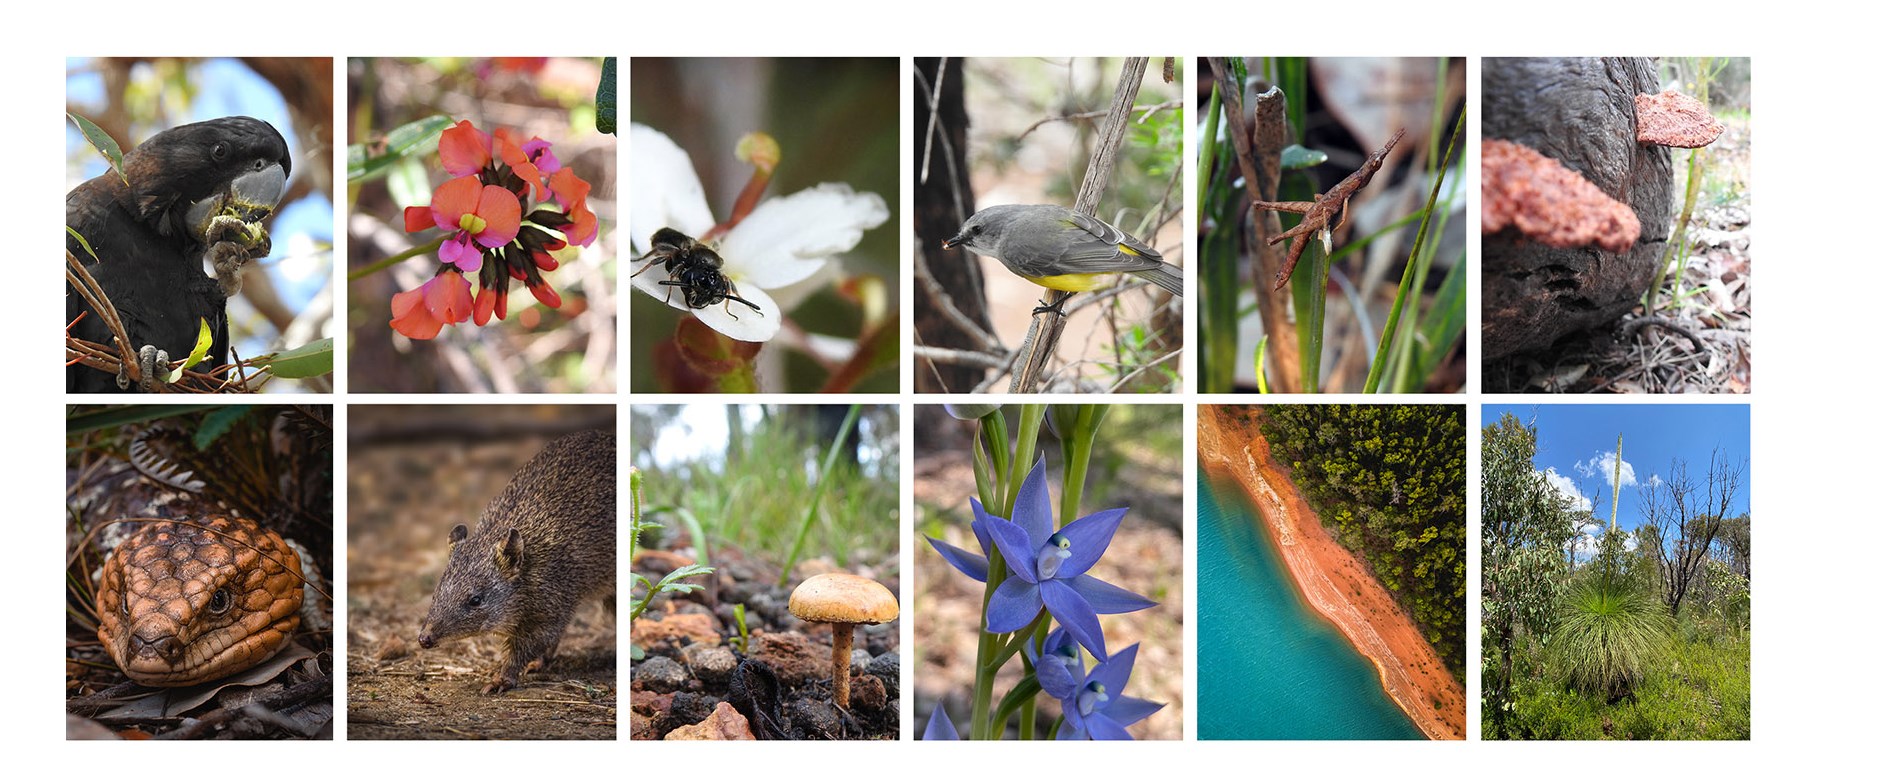 A grid of images representing the biodiversity in our City